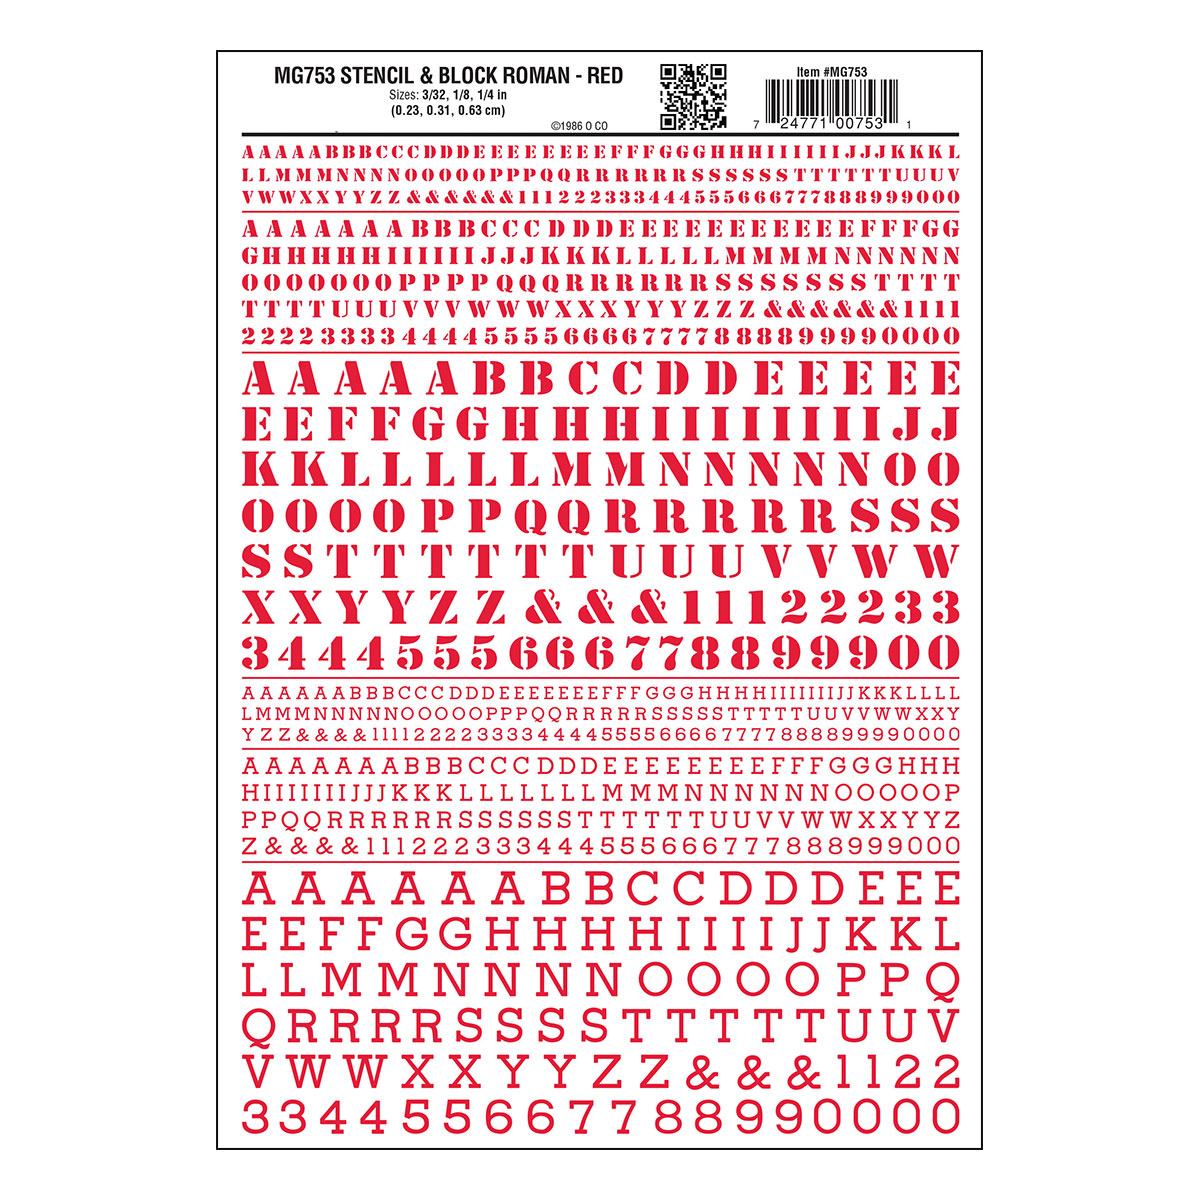 Stencil & Block Roman Red - Package contains one sheet: 5 3/4" x 8 1/4" (14